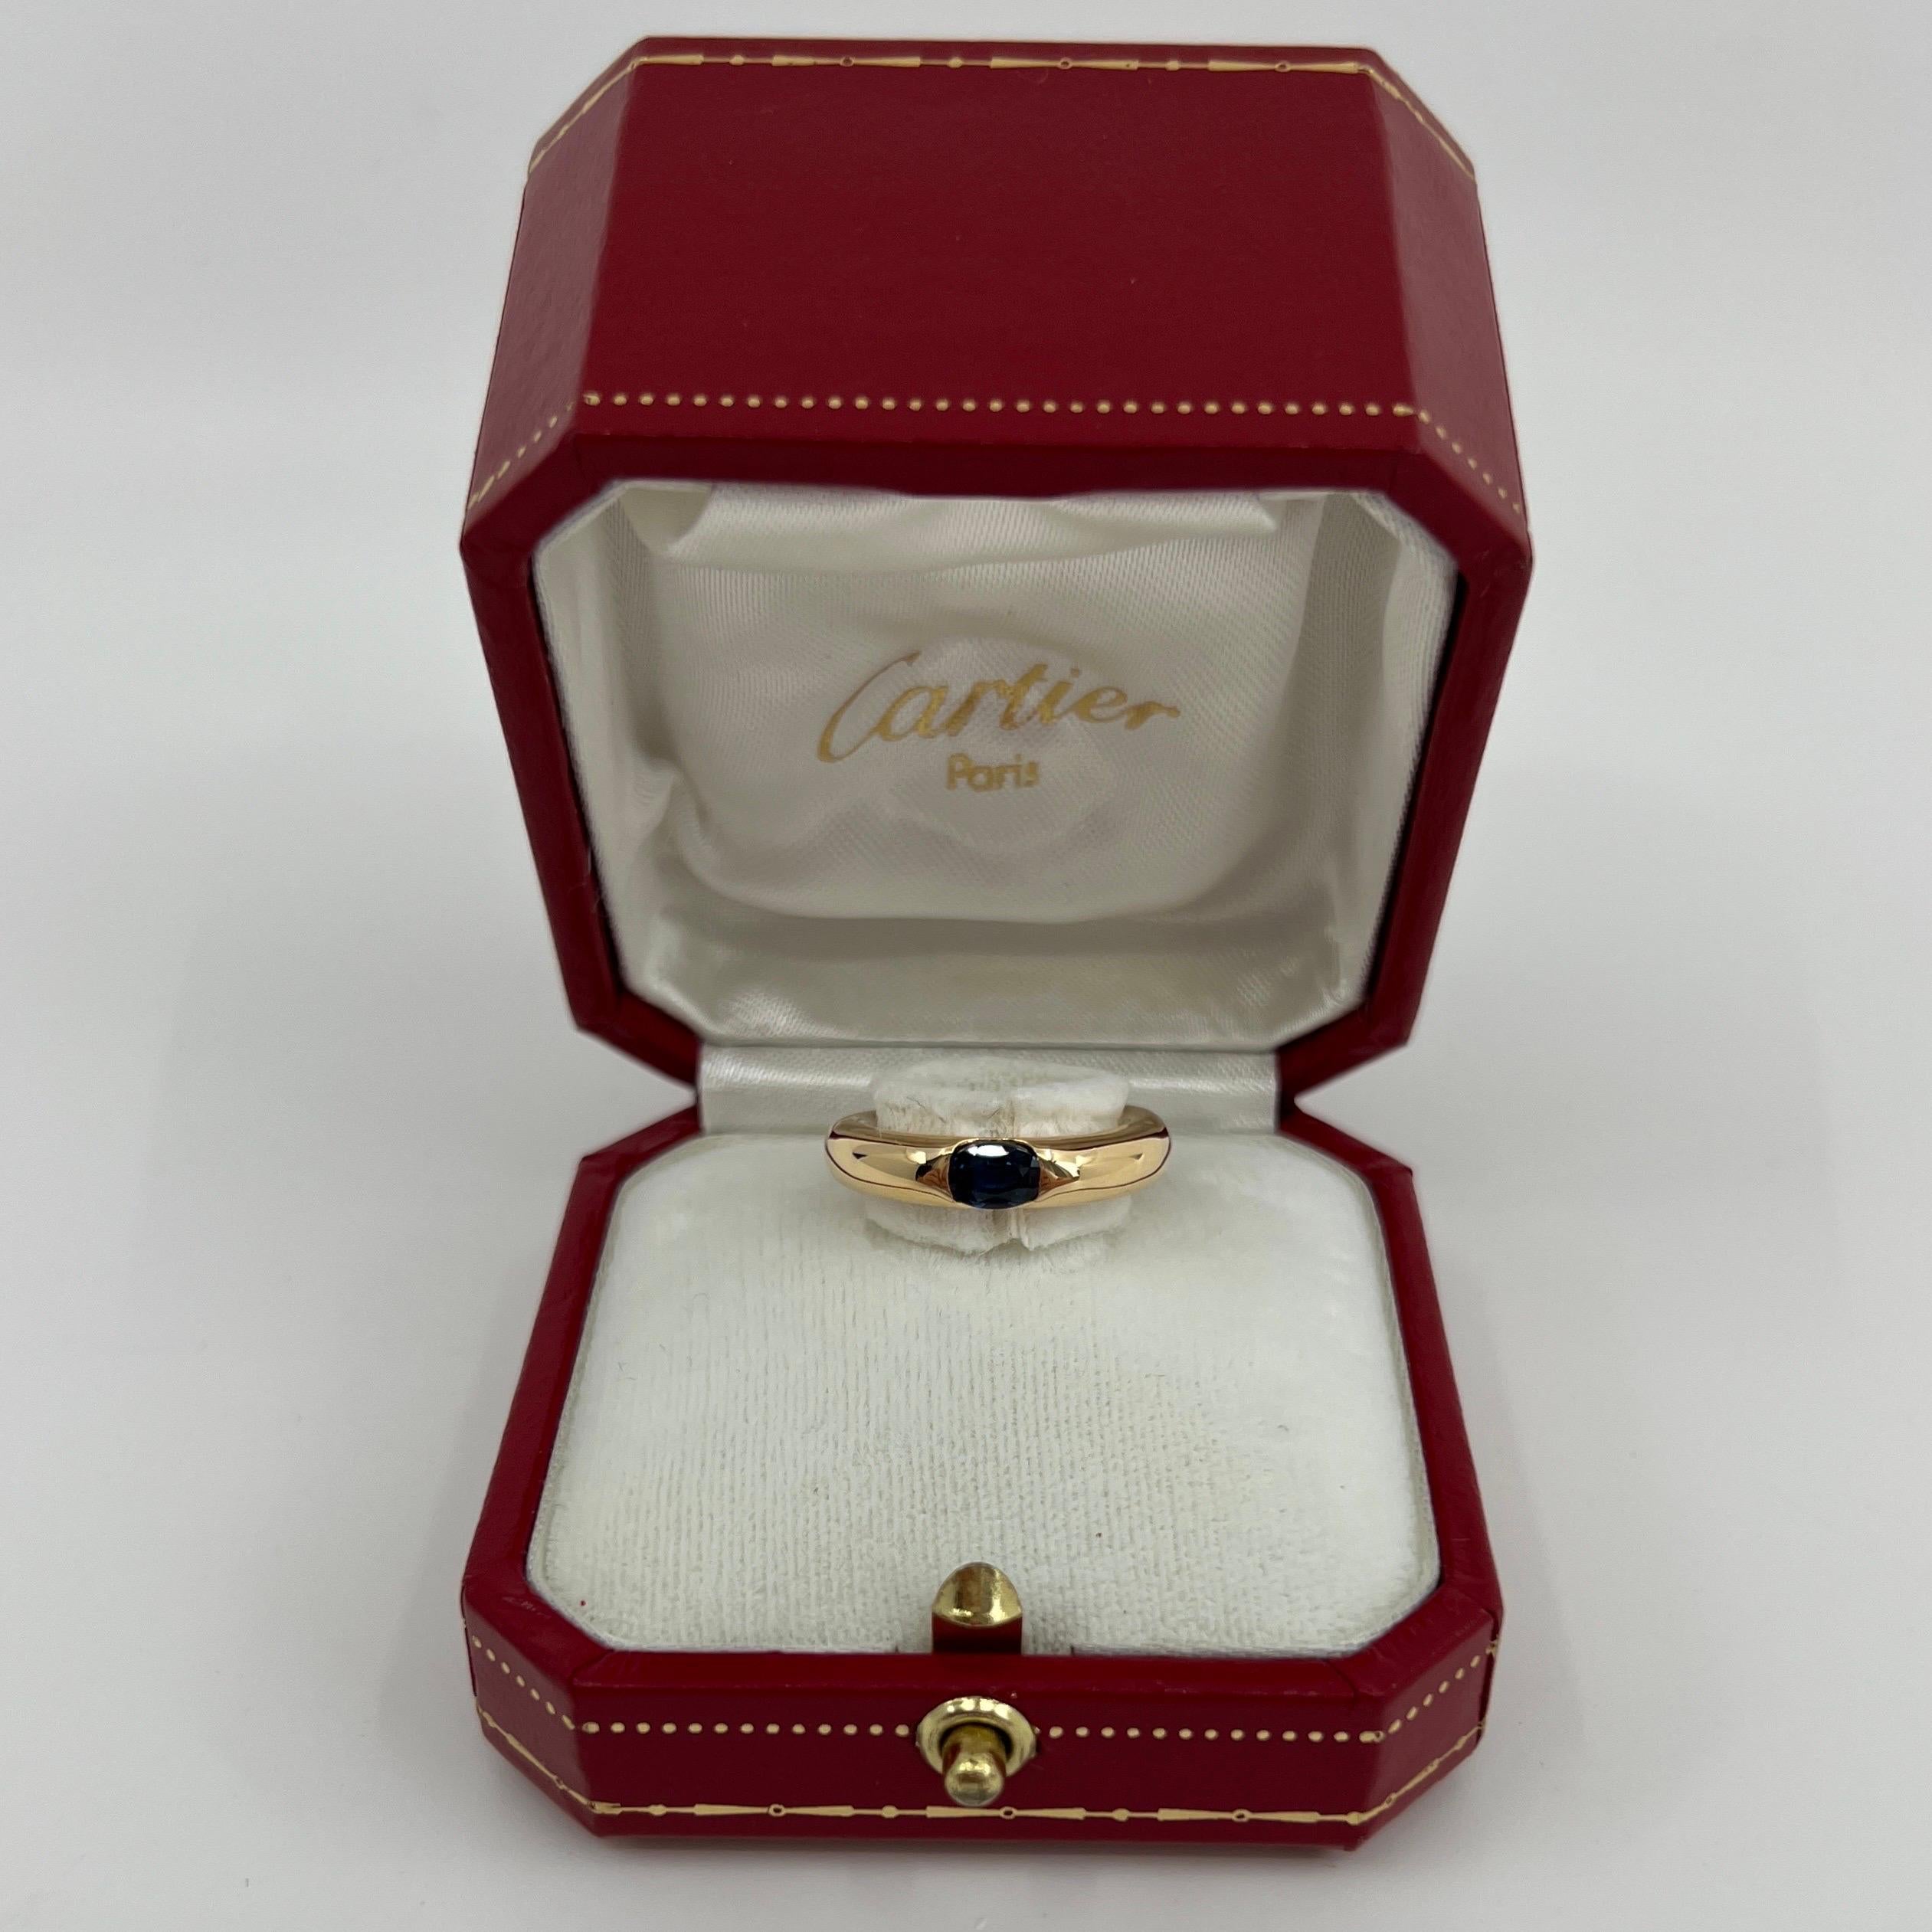 Vintage Cartier Deep Blue Sapphire 18k Yellow Gold Solitaire Ring.

Stunning yellow gold ring set with a fine deep blue sapphire. Fine jewellery houses like Cartier only use the finest of gemstones and this sapphire is no exception. An excellent